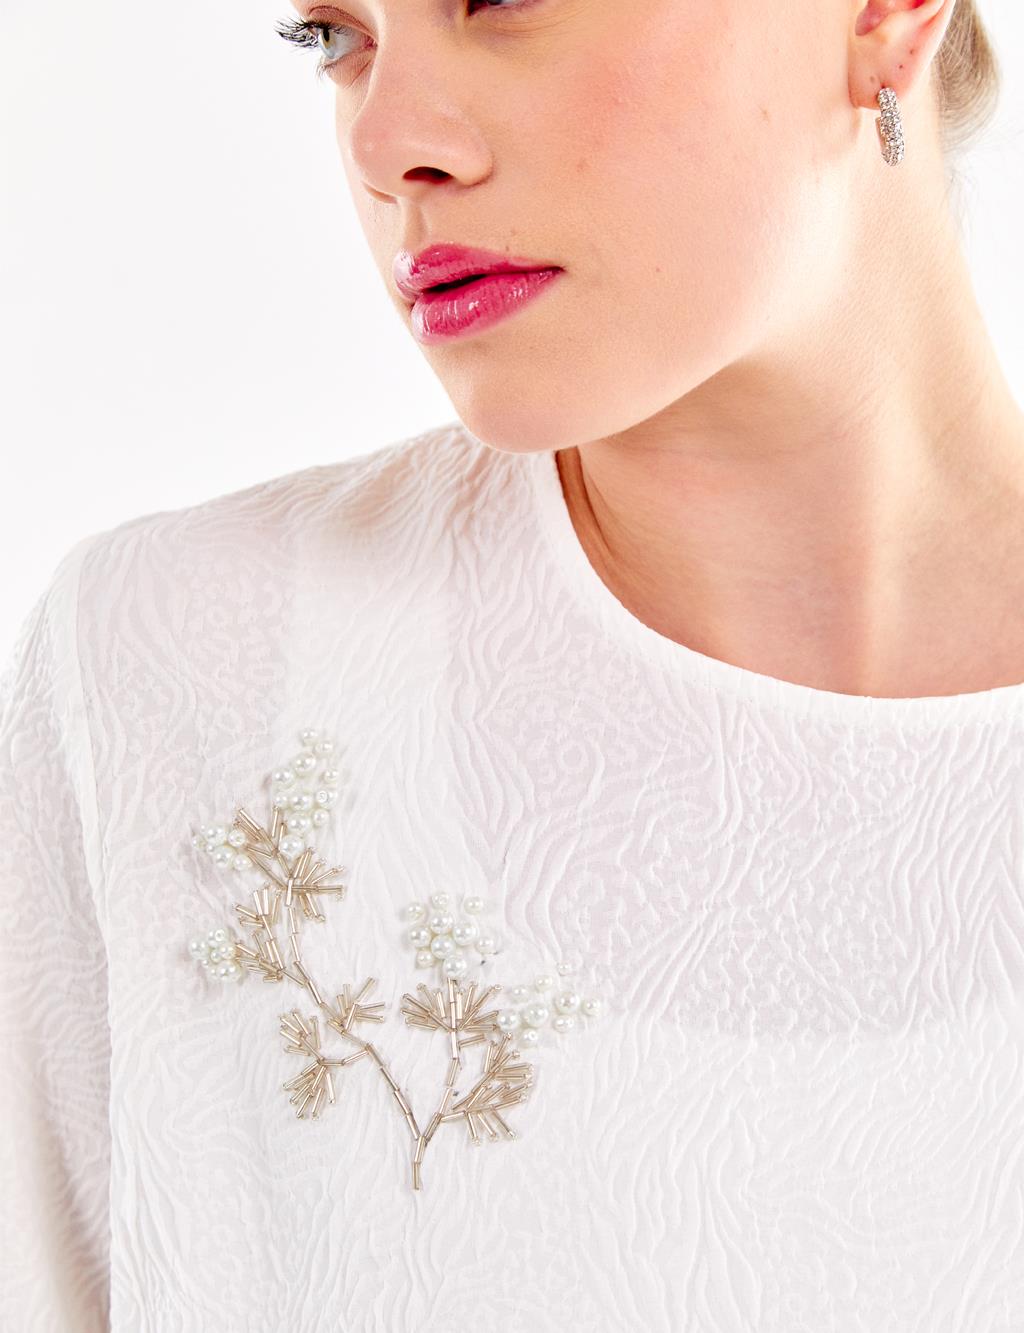 Embroidered Relief Pattern Tunic White